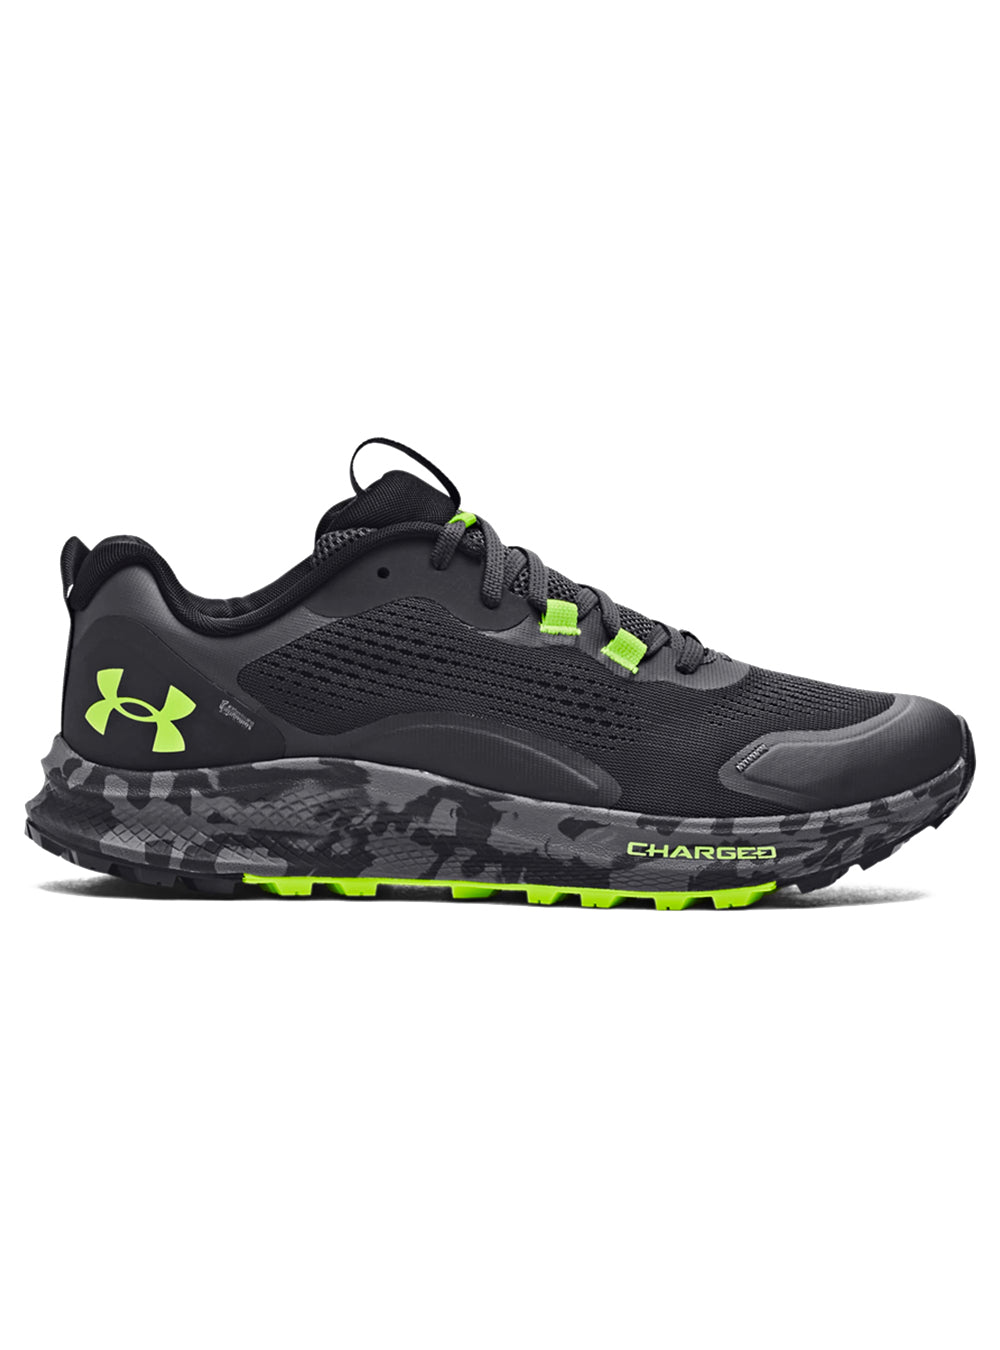 SALE - Under Armour Men's Charged Bandit Trail 2 Running Shoes